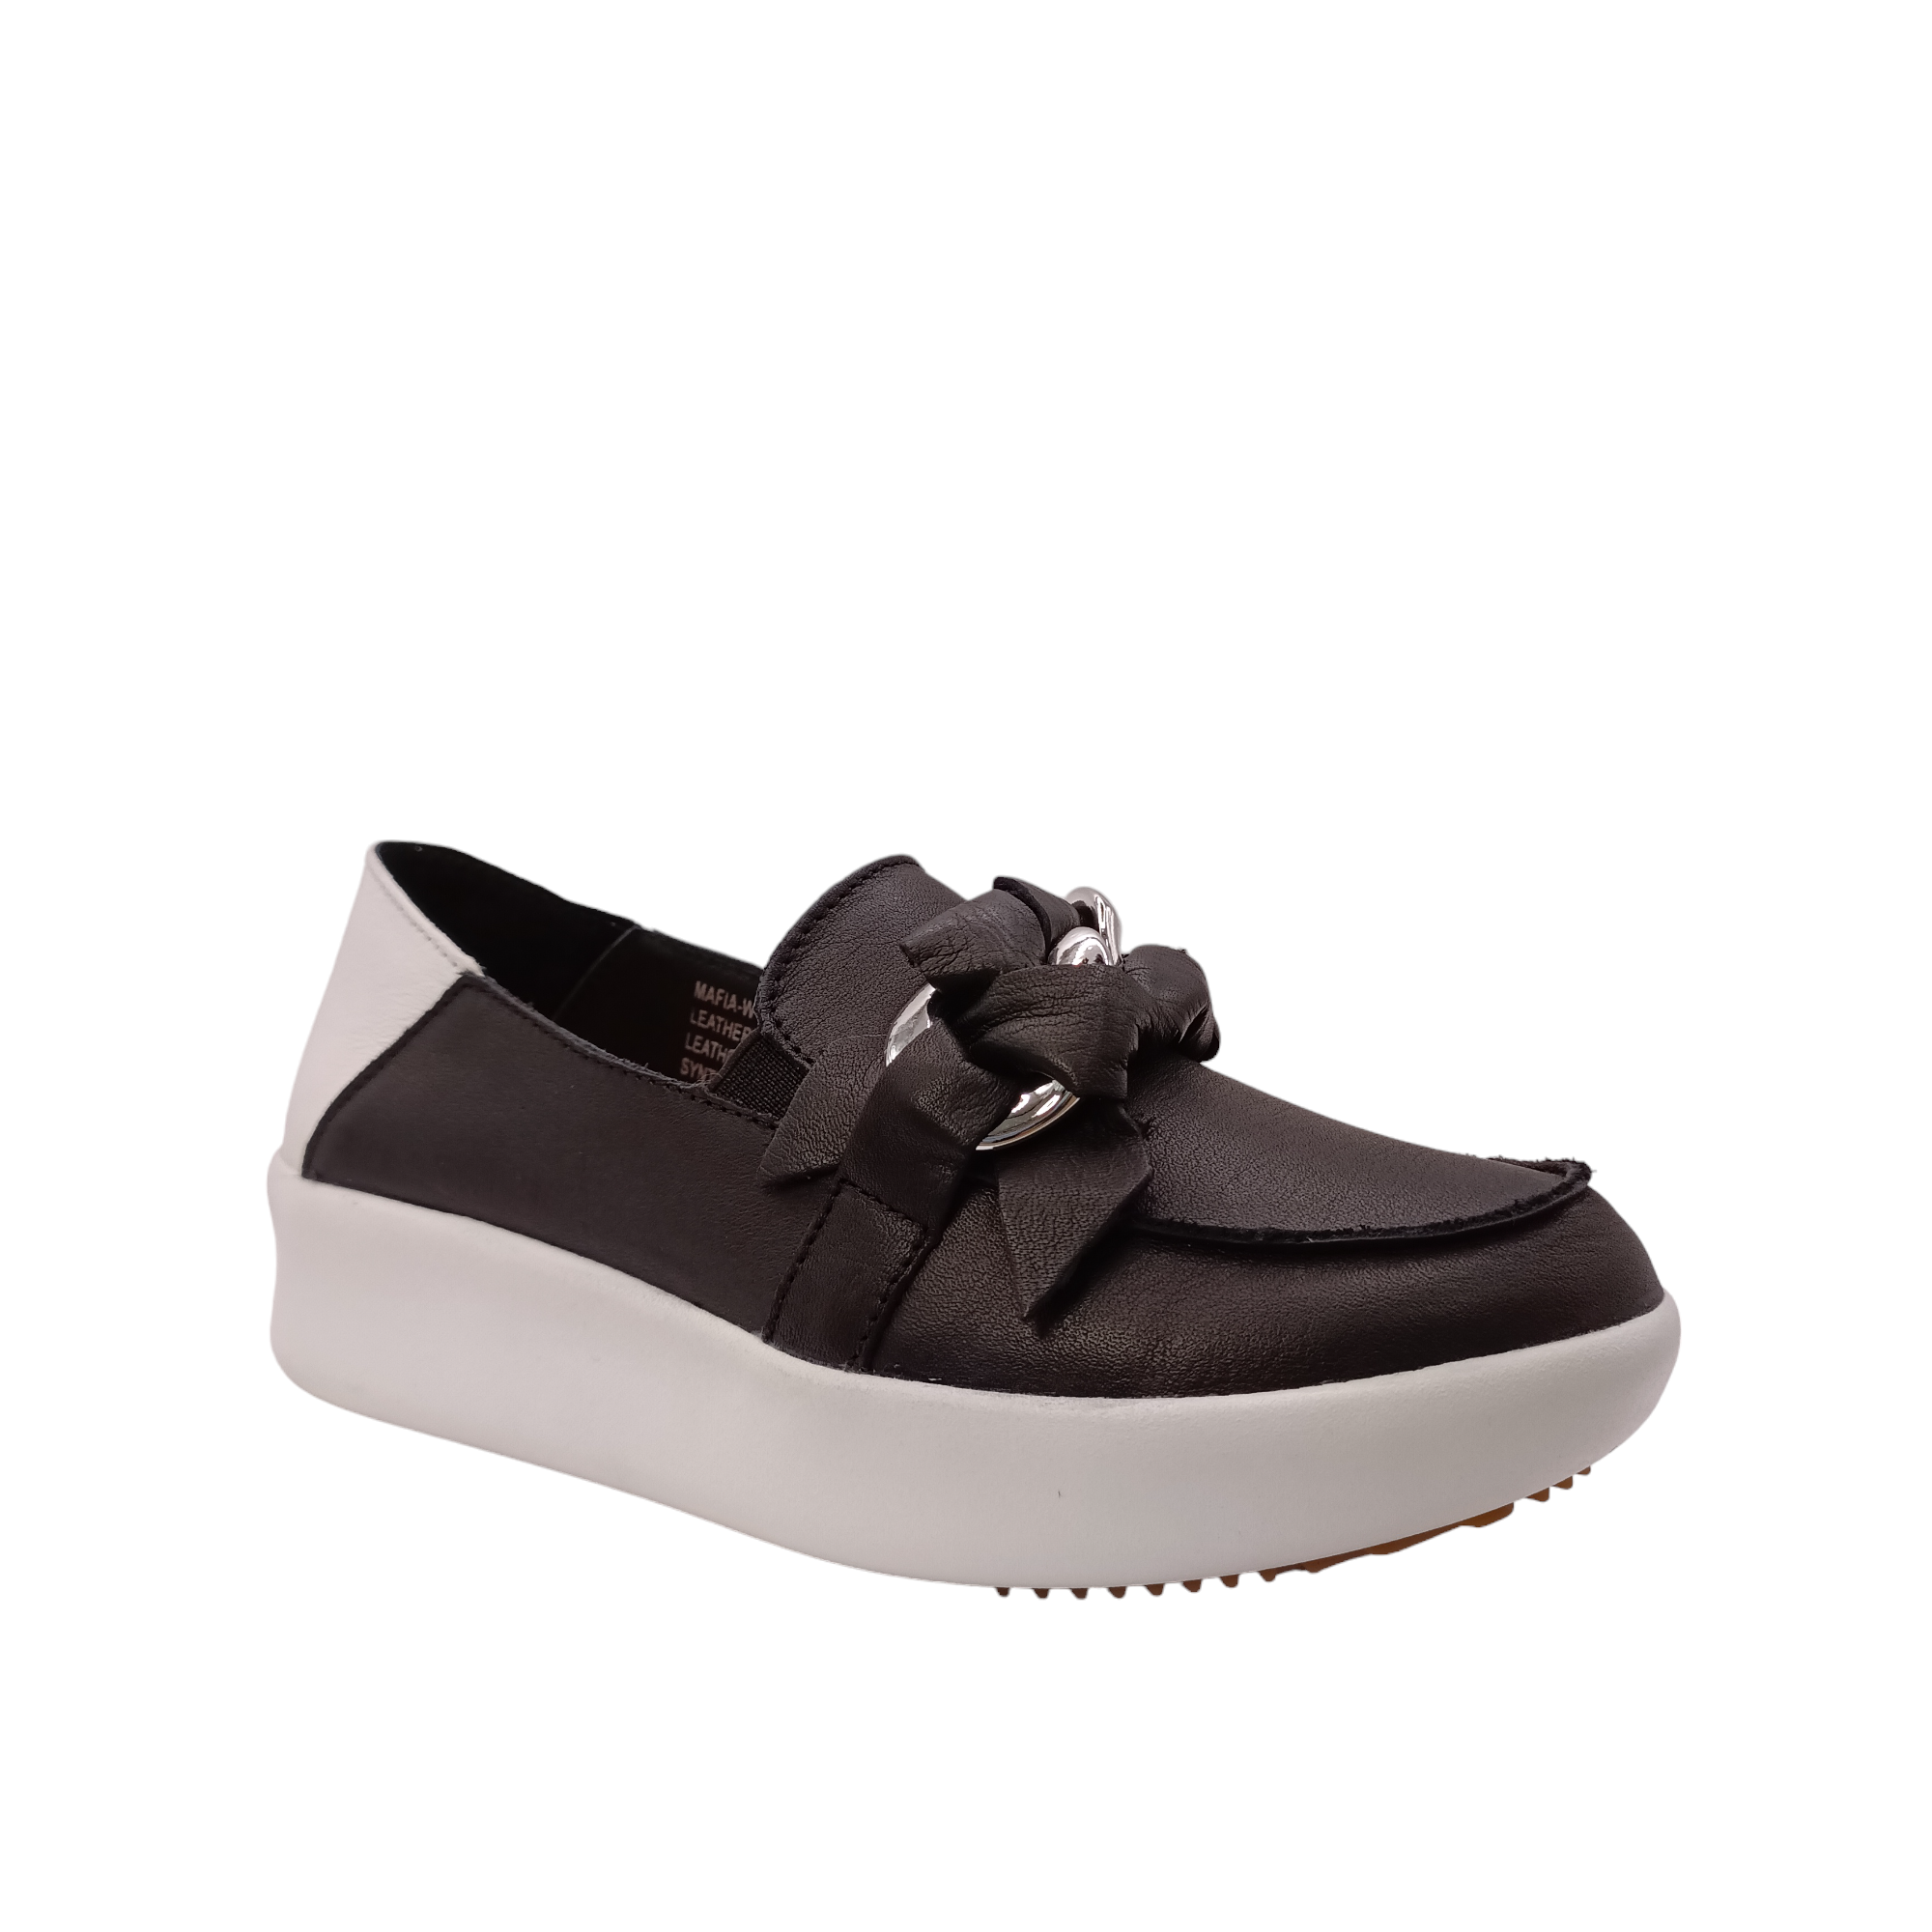 Side angled view of black slip on shoe called mafia from Alfie & Evie. Black leather laced in silver chain decorating the top, white leather heel with a white sole. Shop Alfie & Evie Womens Shoes online and In-Store with shoe&me Mount Maunganui.